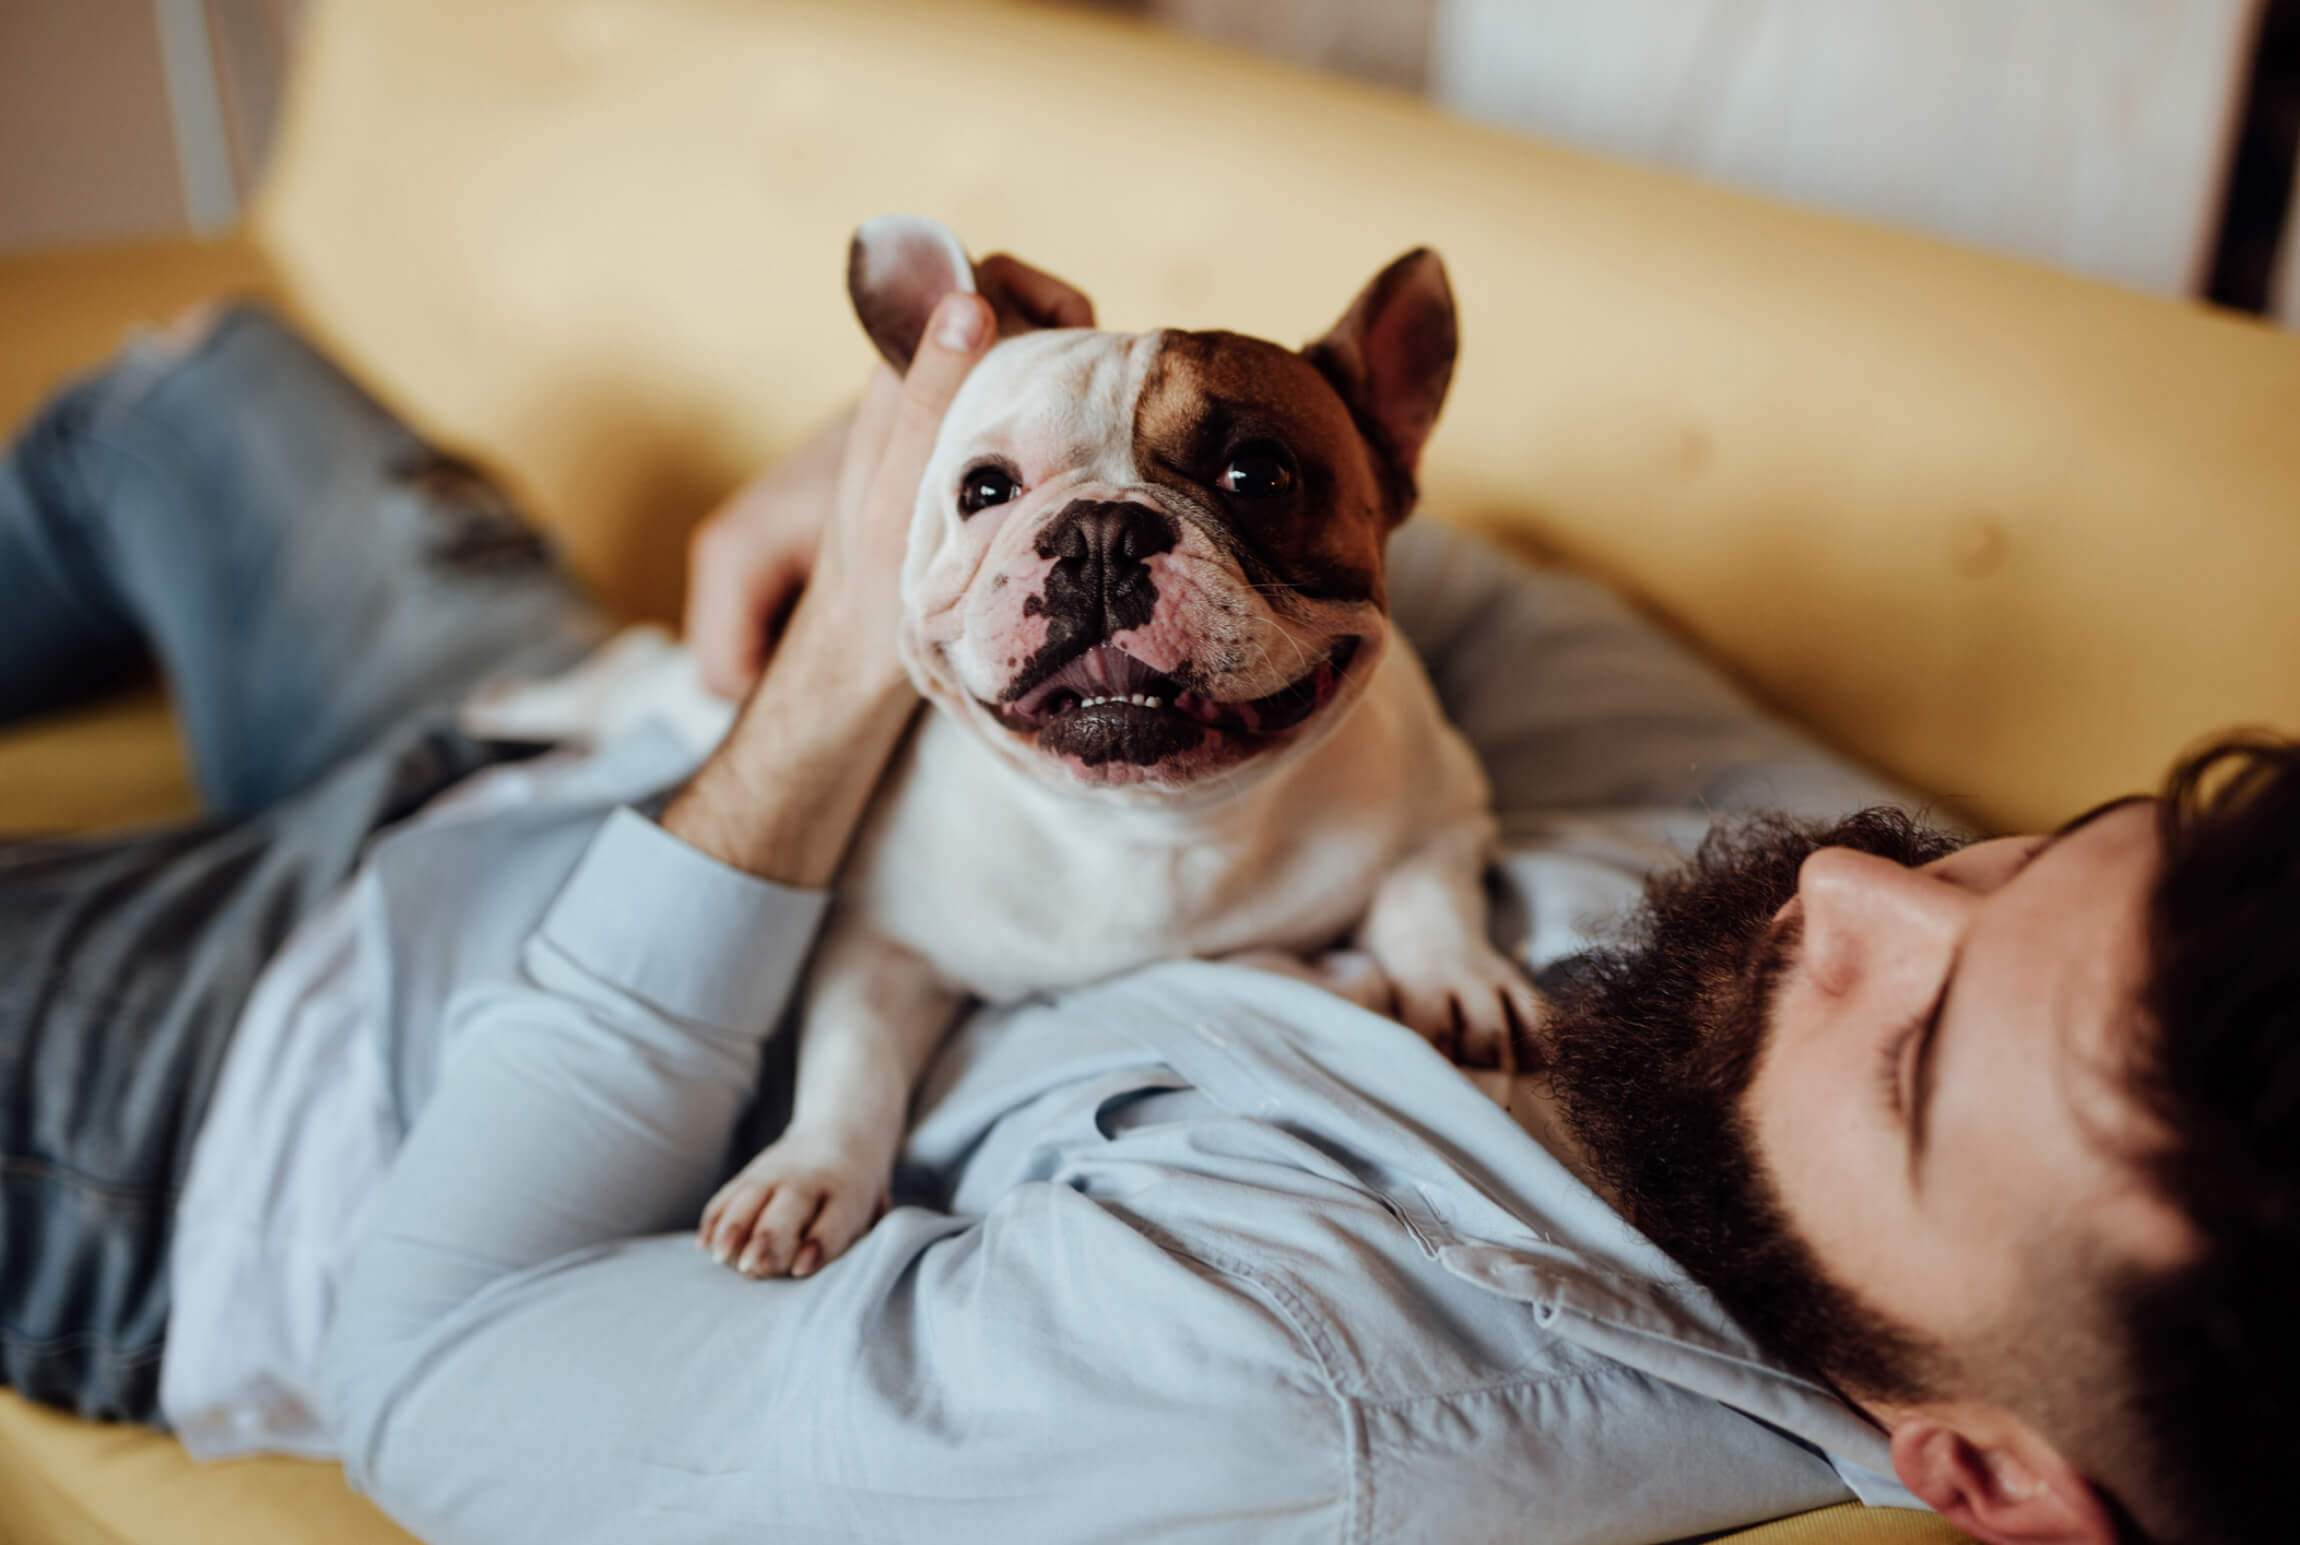 A french bulldog sitting on a man laying down. The dog is enjoying being pet.